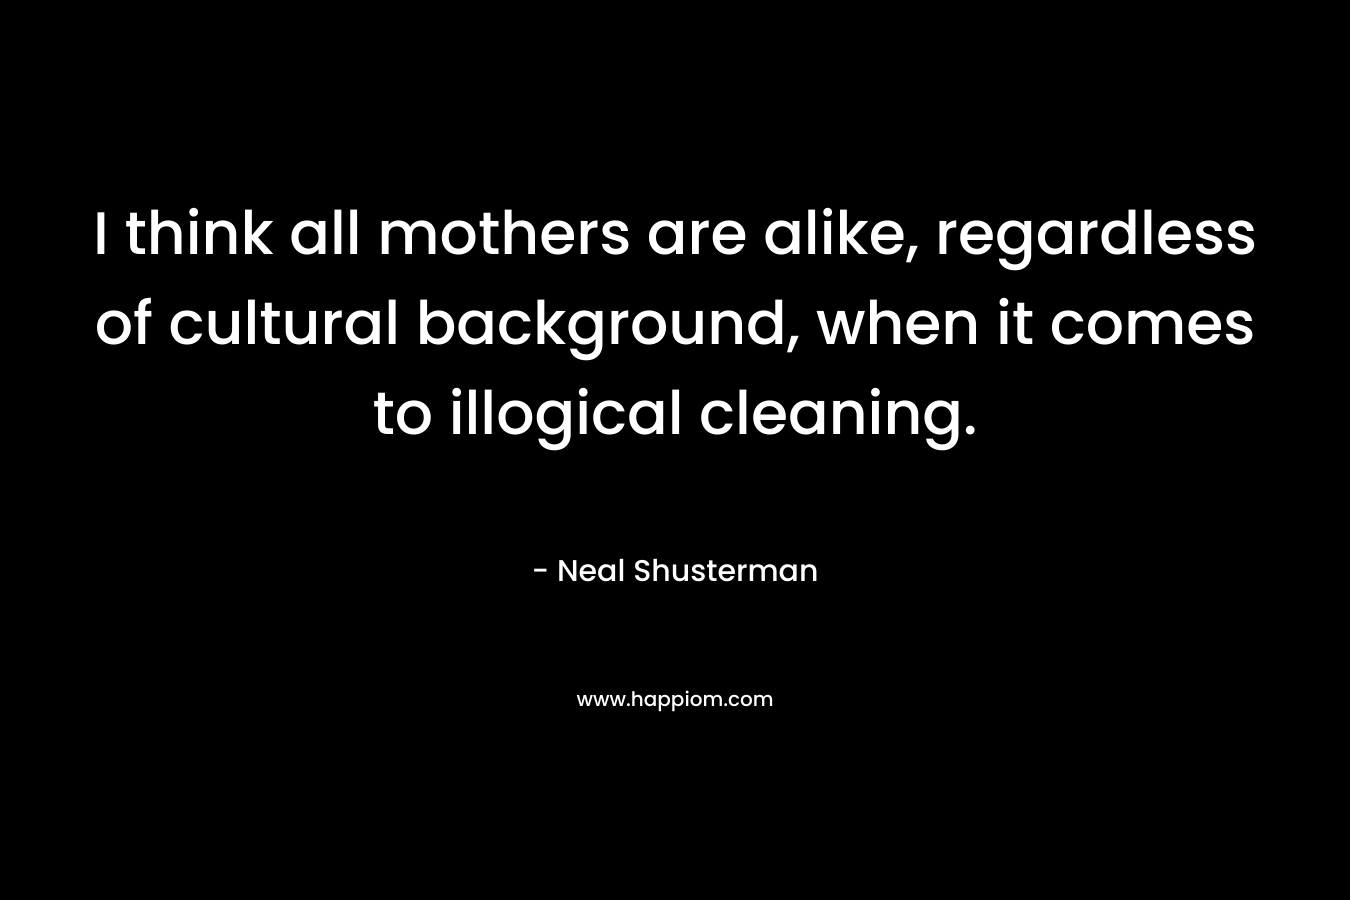 I think all mothers are alike, regardless of cultural background, when it comes to illogical cleaning. – Neal Shusterman